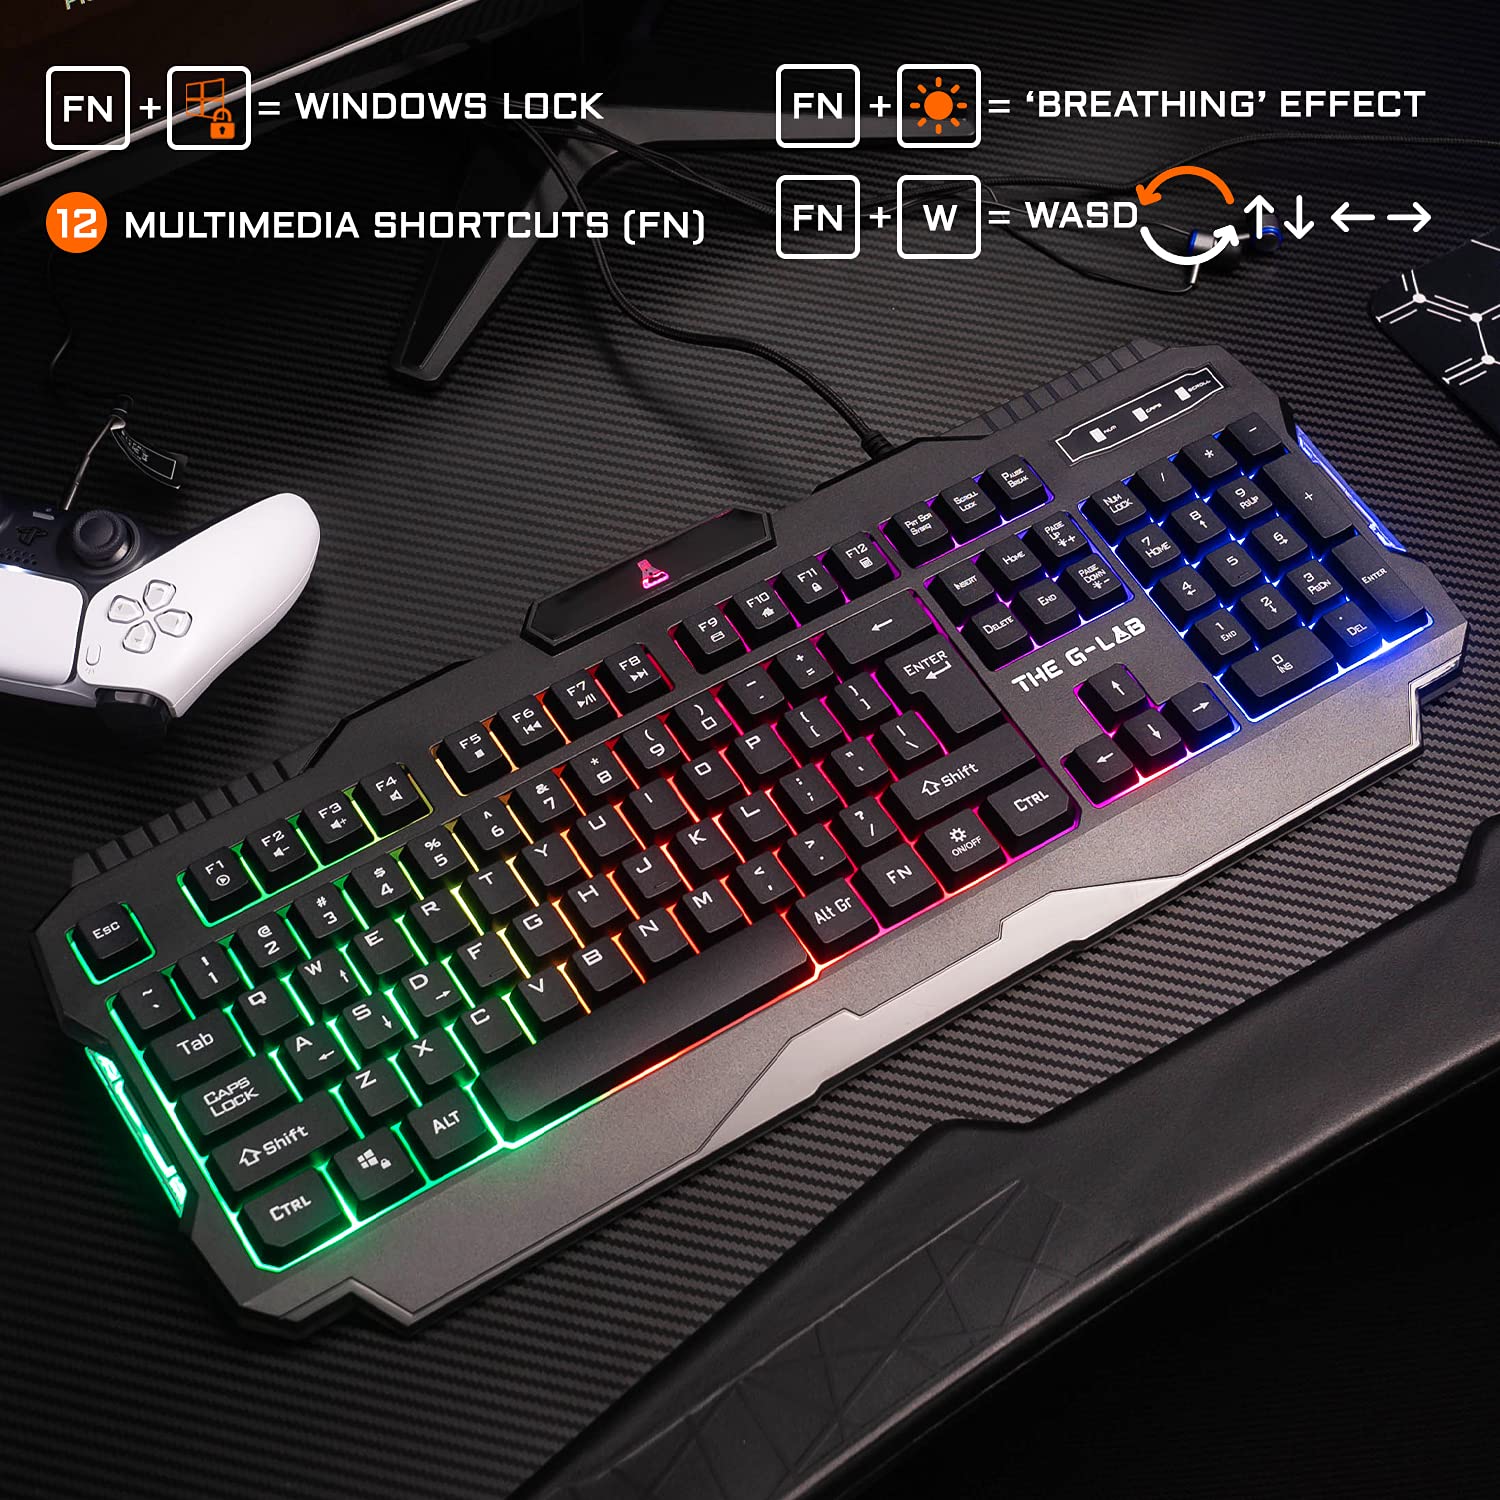 G-LAB Combo Helium - 4-in-1 Gaming Bundle - Backlit QWERTY Gamer Keyboard, 3200 DPI Gaming Mouse, in-Ear Headphones, Non-Slip Mouse Pad - PC Mac PS4 PS5 Xbox One Gamer Pack